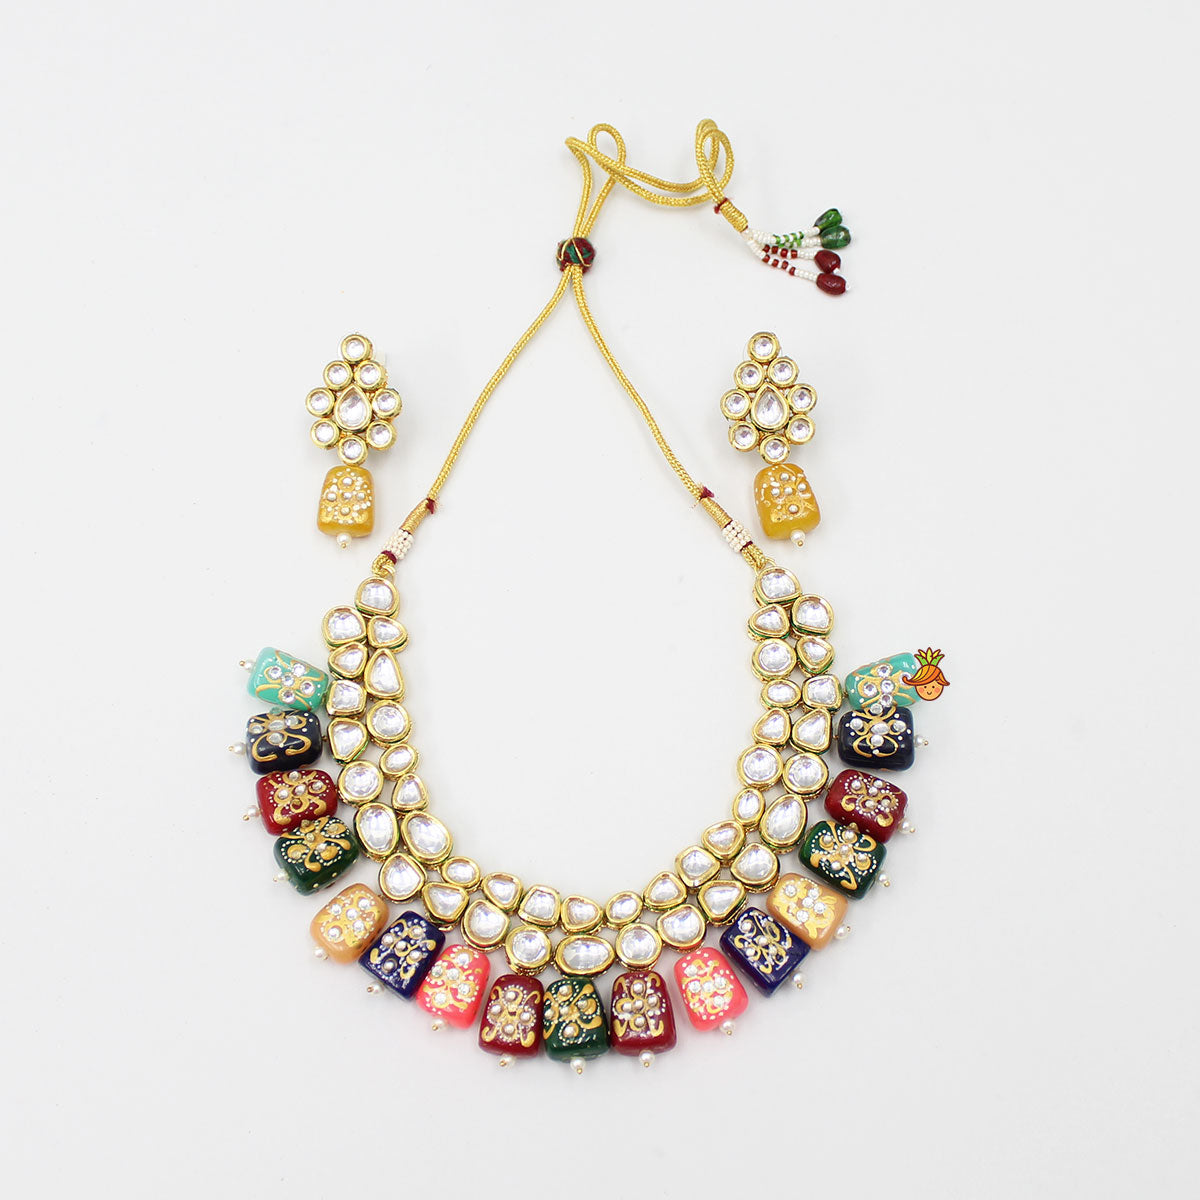 Decorative Multicolour Stones Embellished Necklace With Earrings